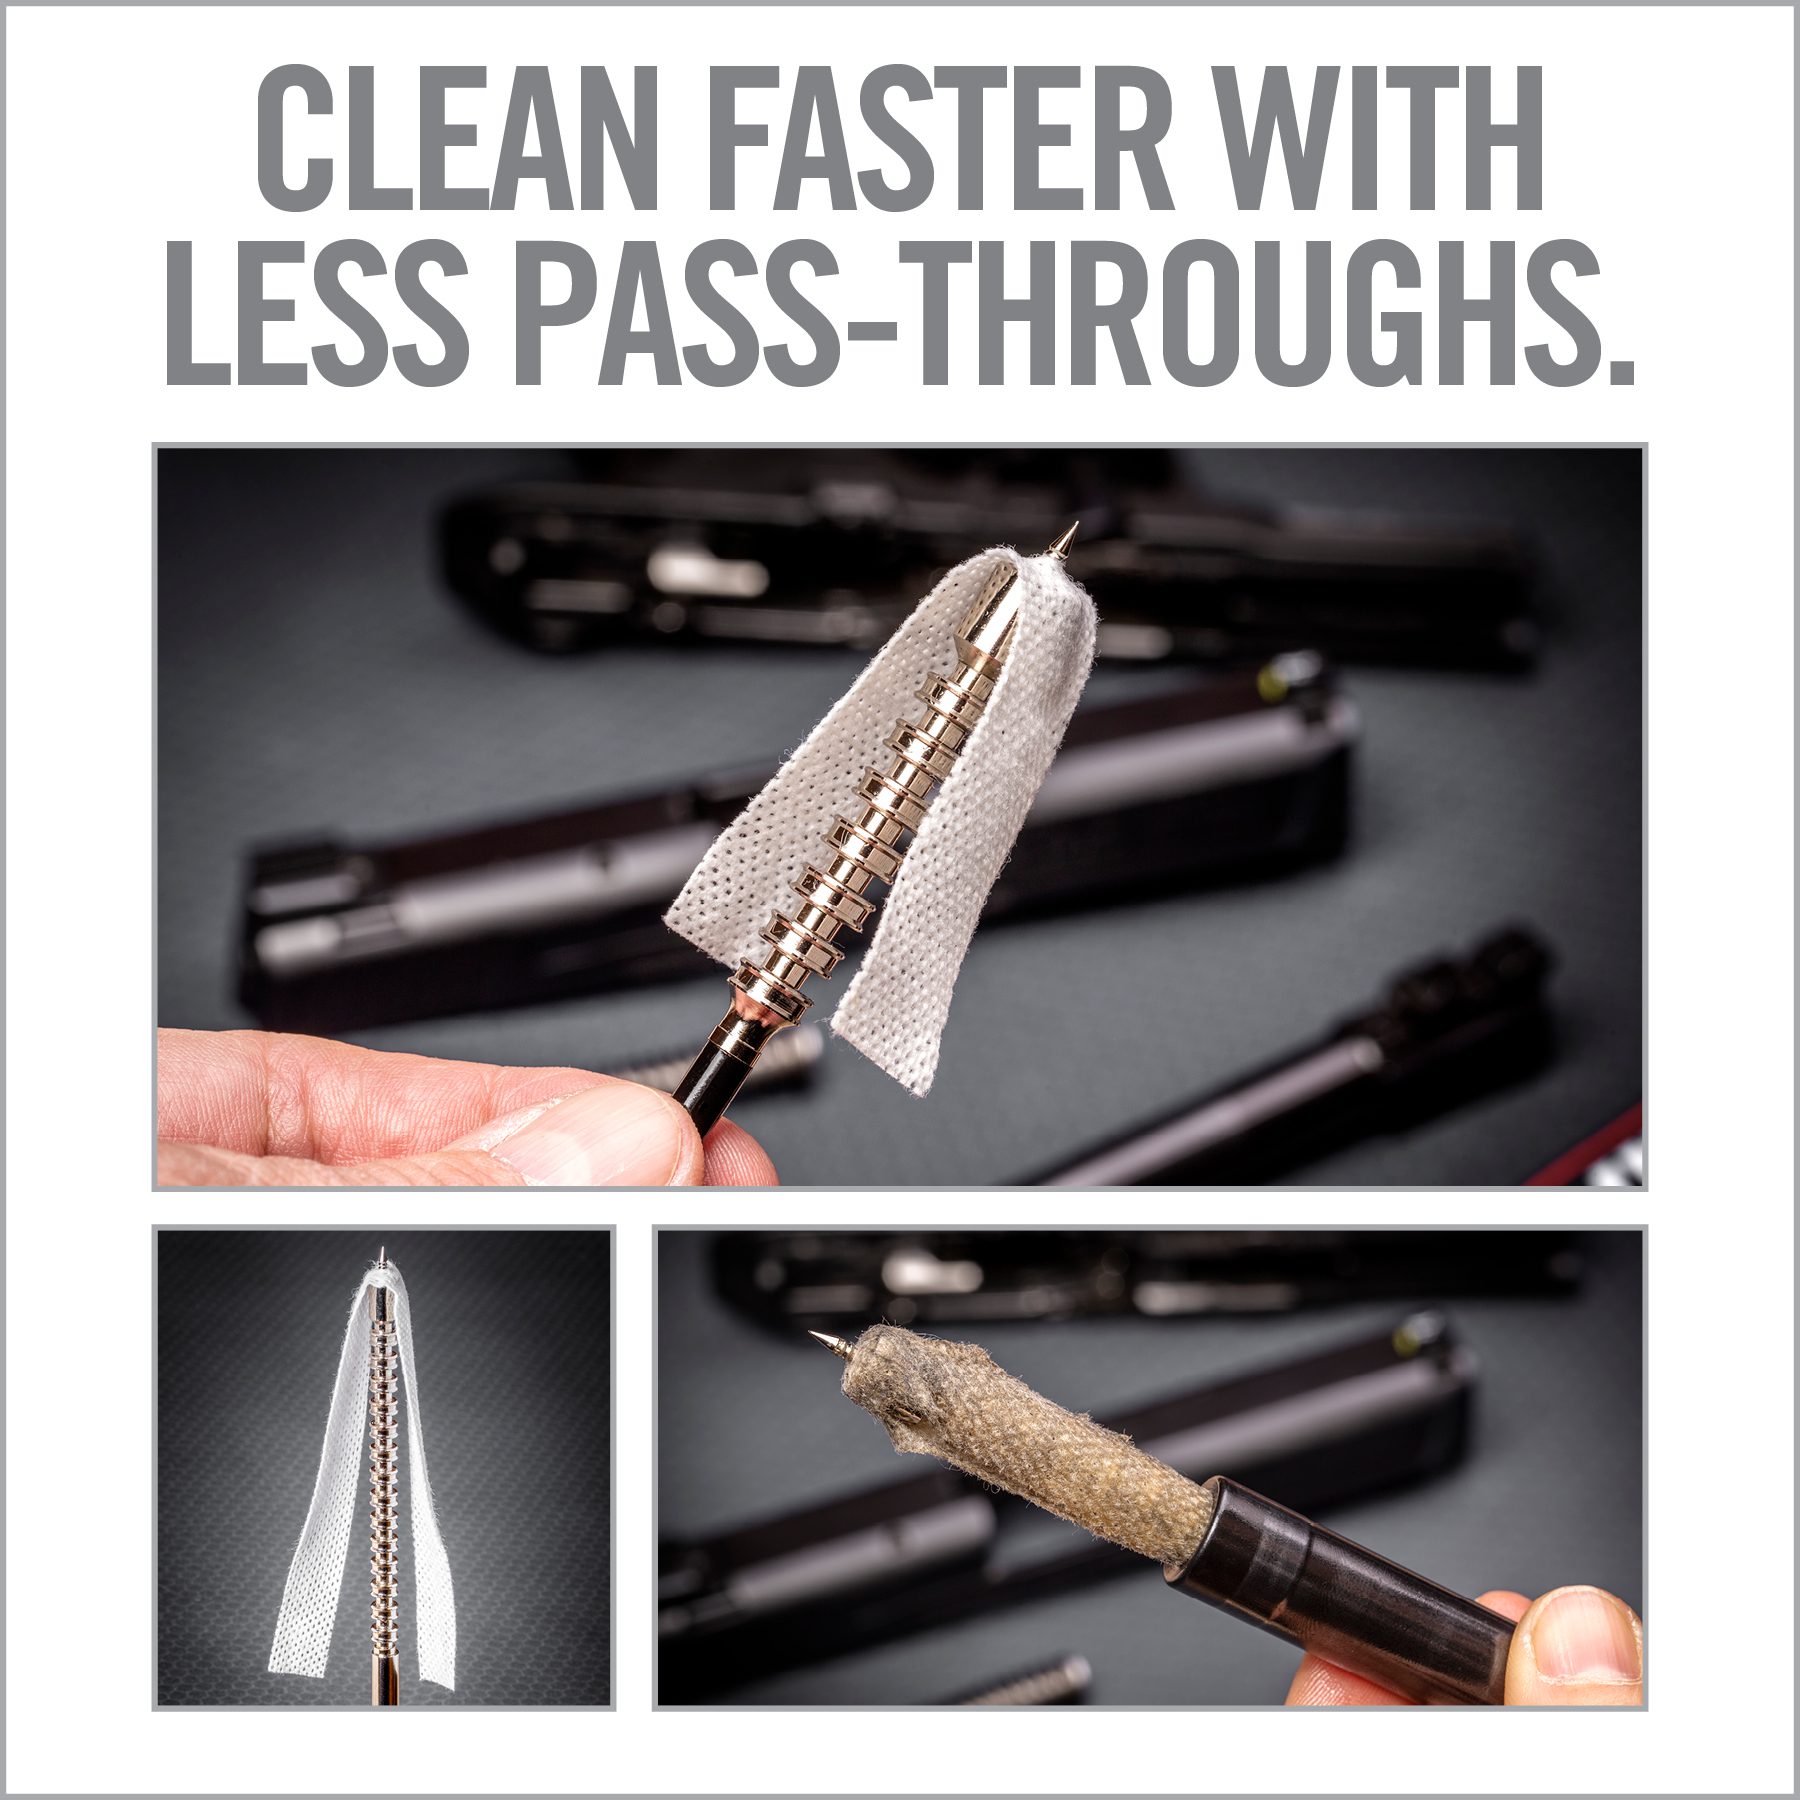 the instructions for how to clean faster with less pass - throughs